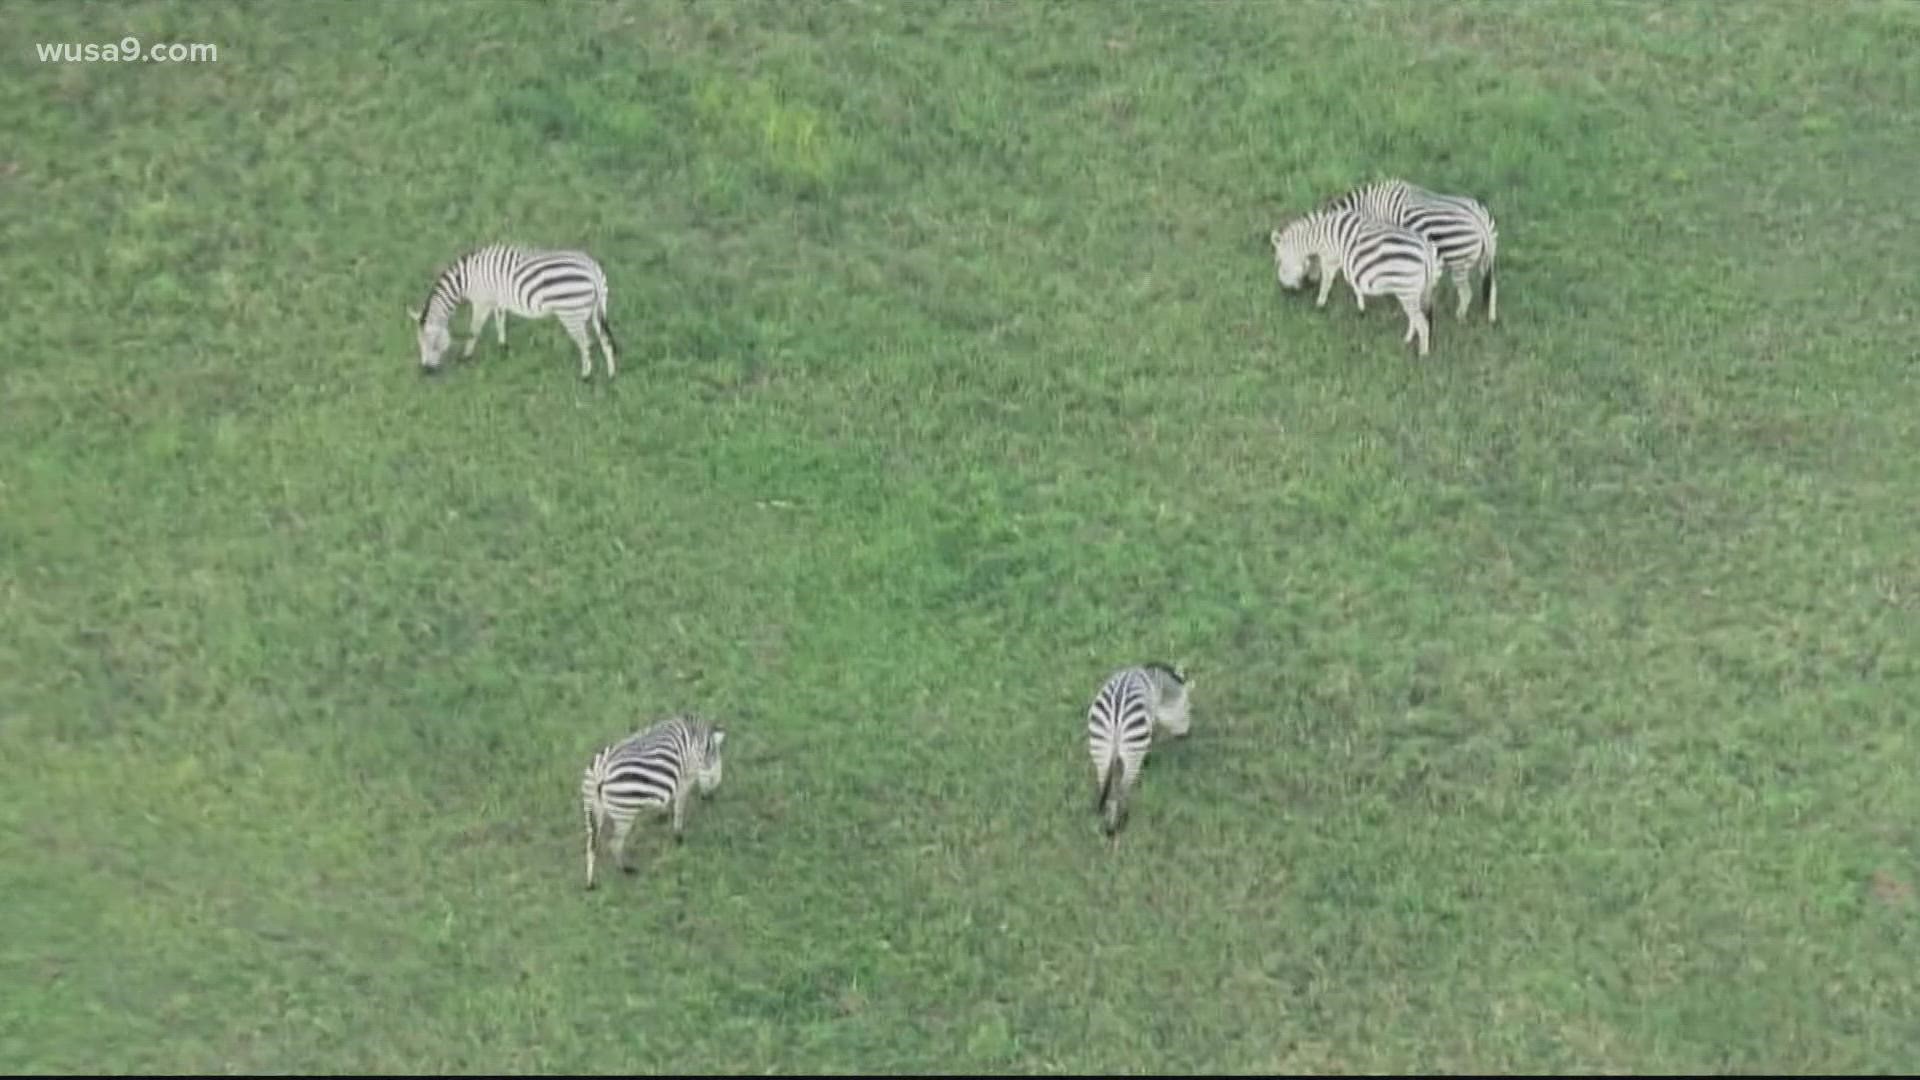 Two zebras missing since Aug. 22 from an Upper Marlboro farm have been caught. WUSA9 was first to report the news. The zebra owner faces animal cruelty charges.